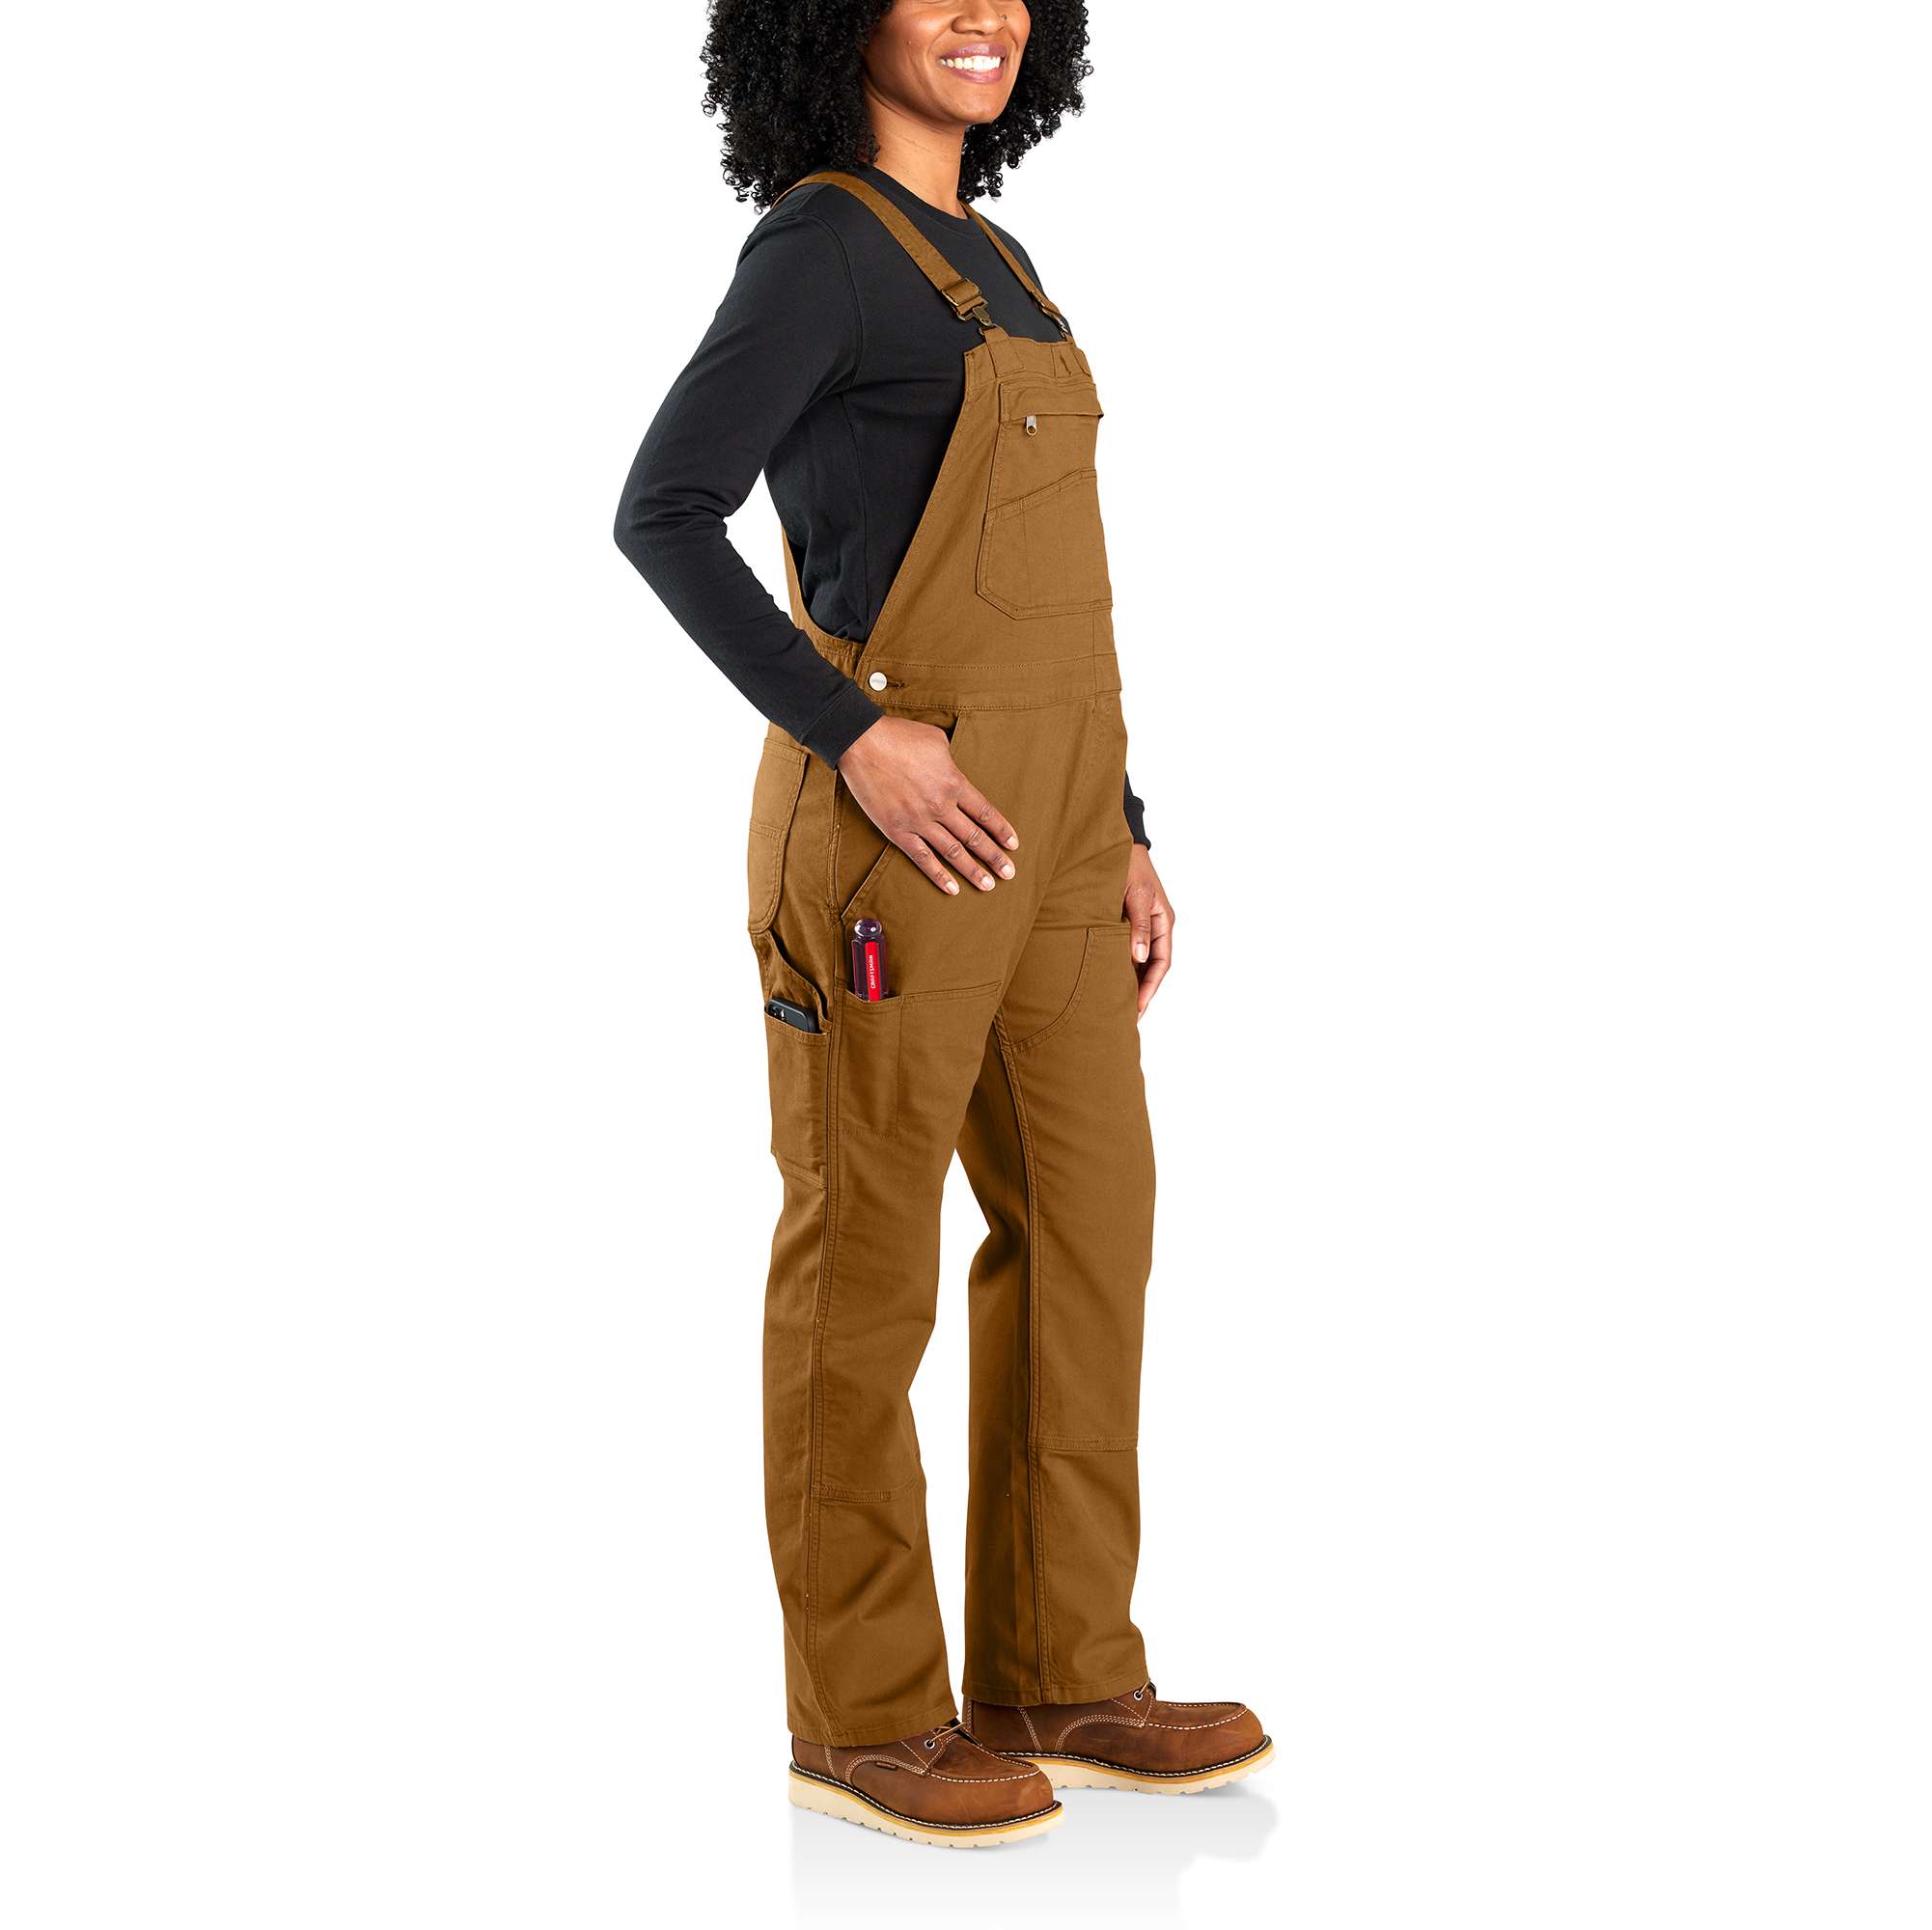 Carhartt Women's Carhartt Brown Sleeveless Canvas Overall (Medium Short) in  the Coveralls & Overalls department at